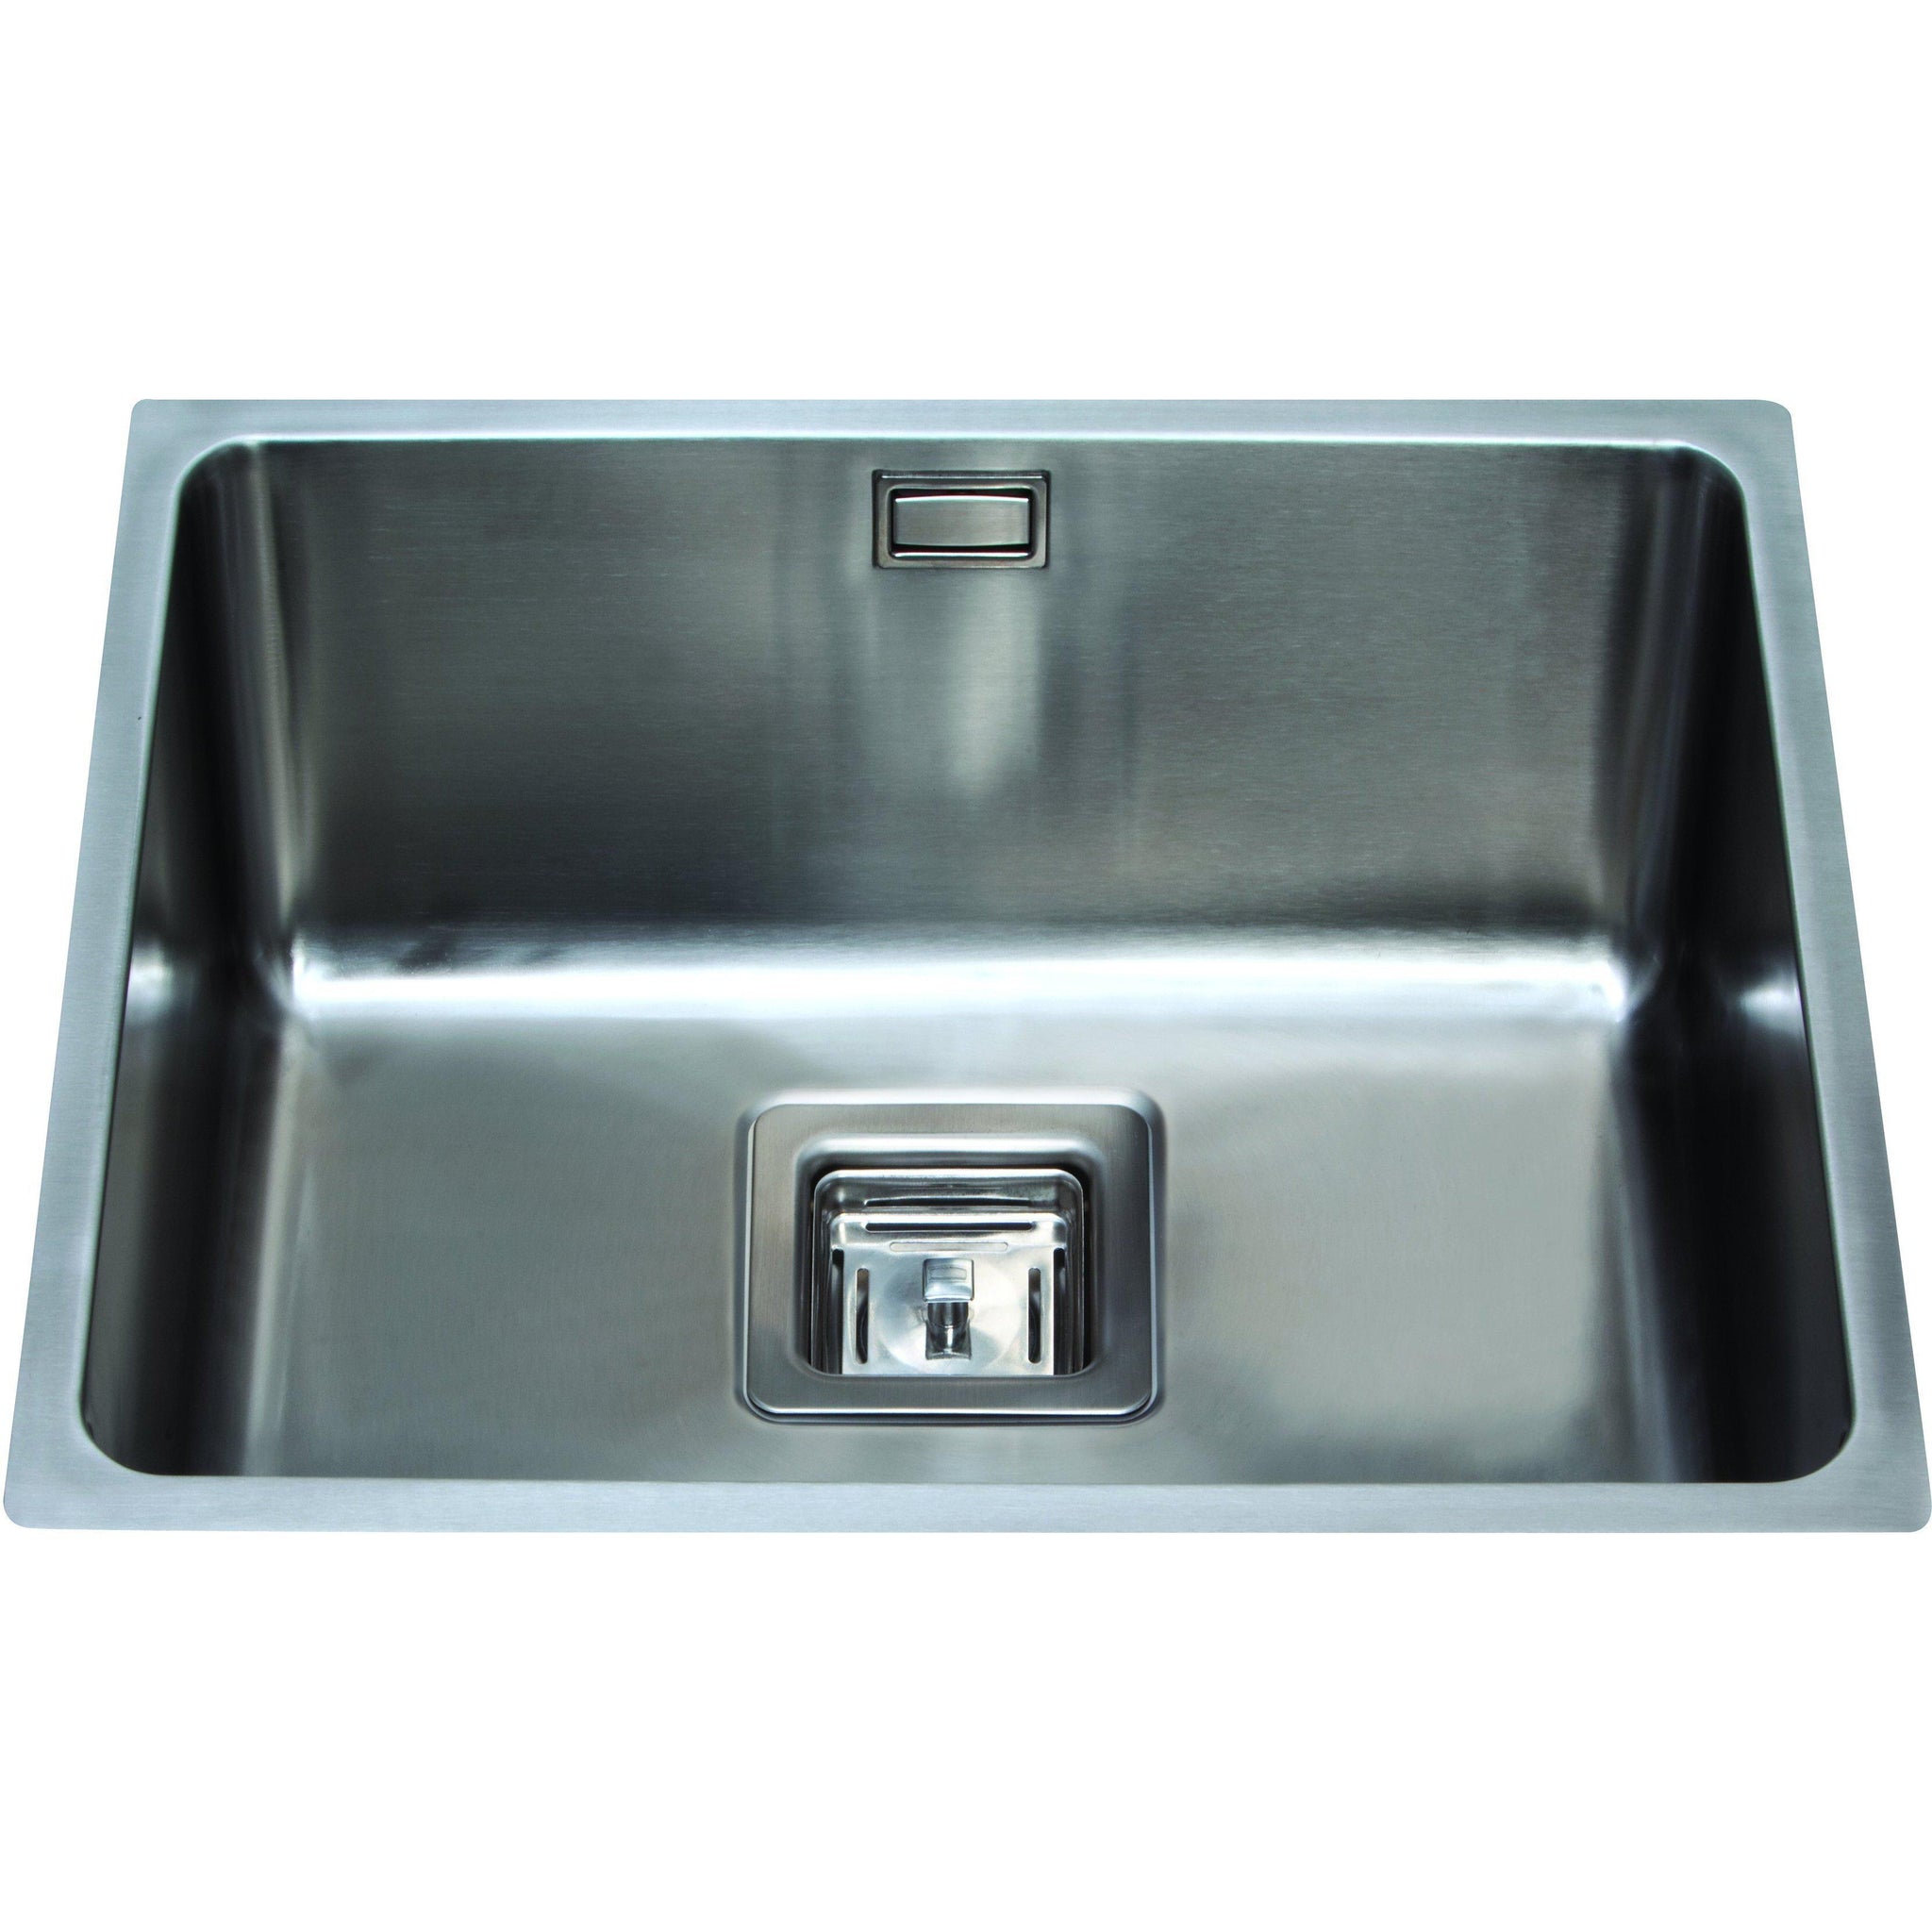 Cda Ksc24ss Undermount Square Single Bowl Sink Stainless Steel